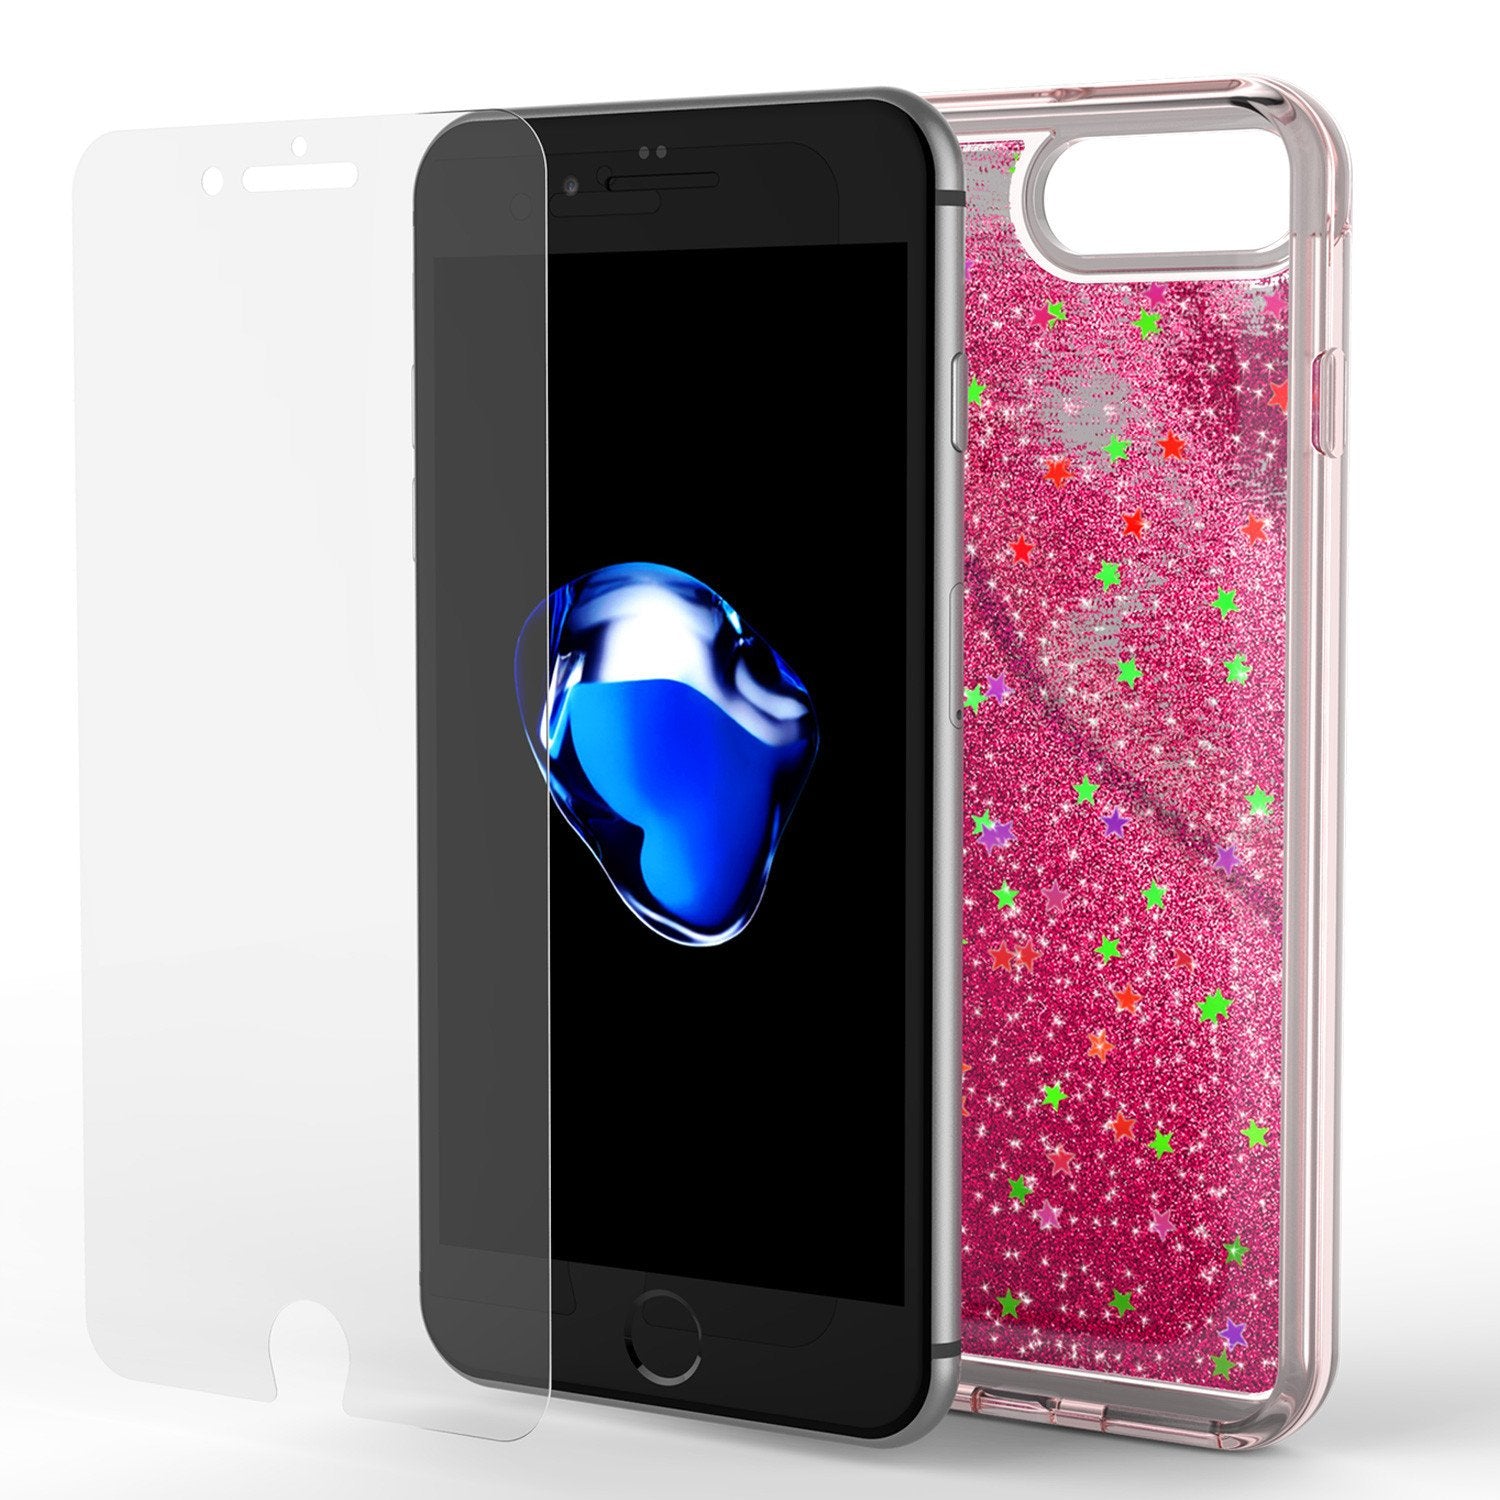 iPhone 7 Plus Case, Punkcase [Liquid Pink Series] Protective Dual Layer Floating Glitter Cover with lots of Bling & Sparkle + 0.3mm Tempered Glass Screen Protector for Apple iPhone 7s Plus